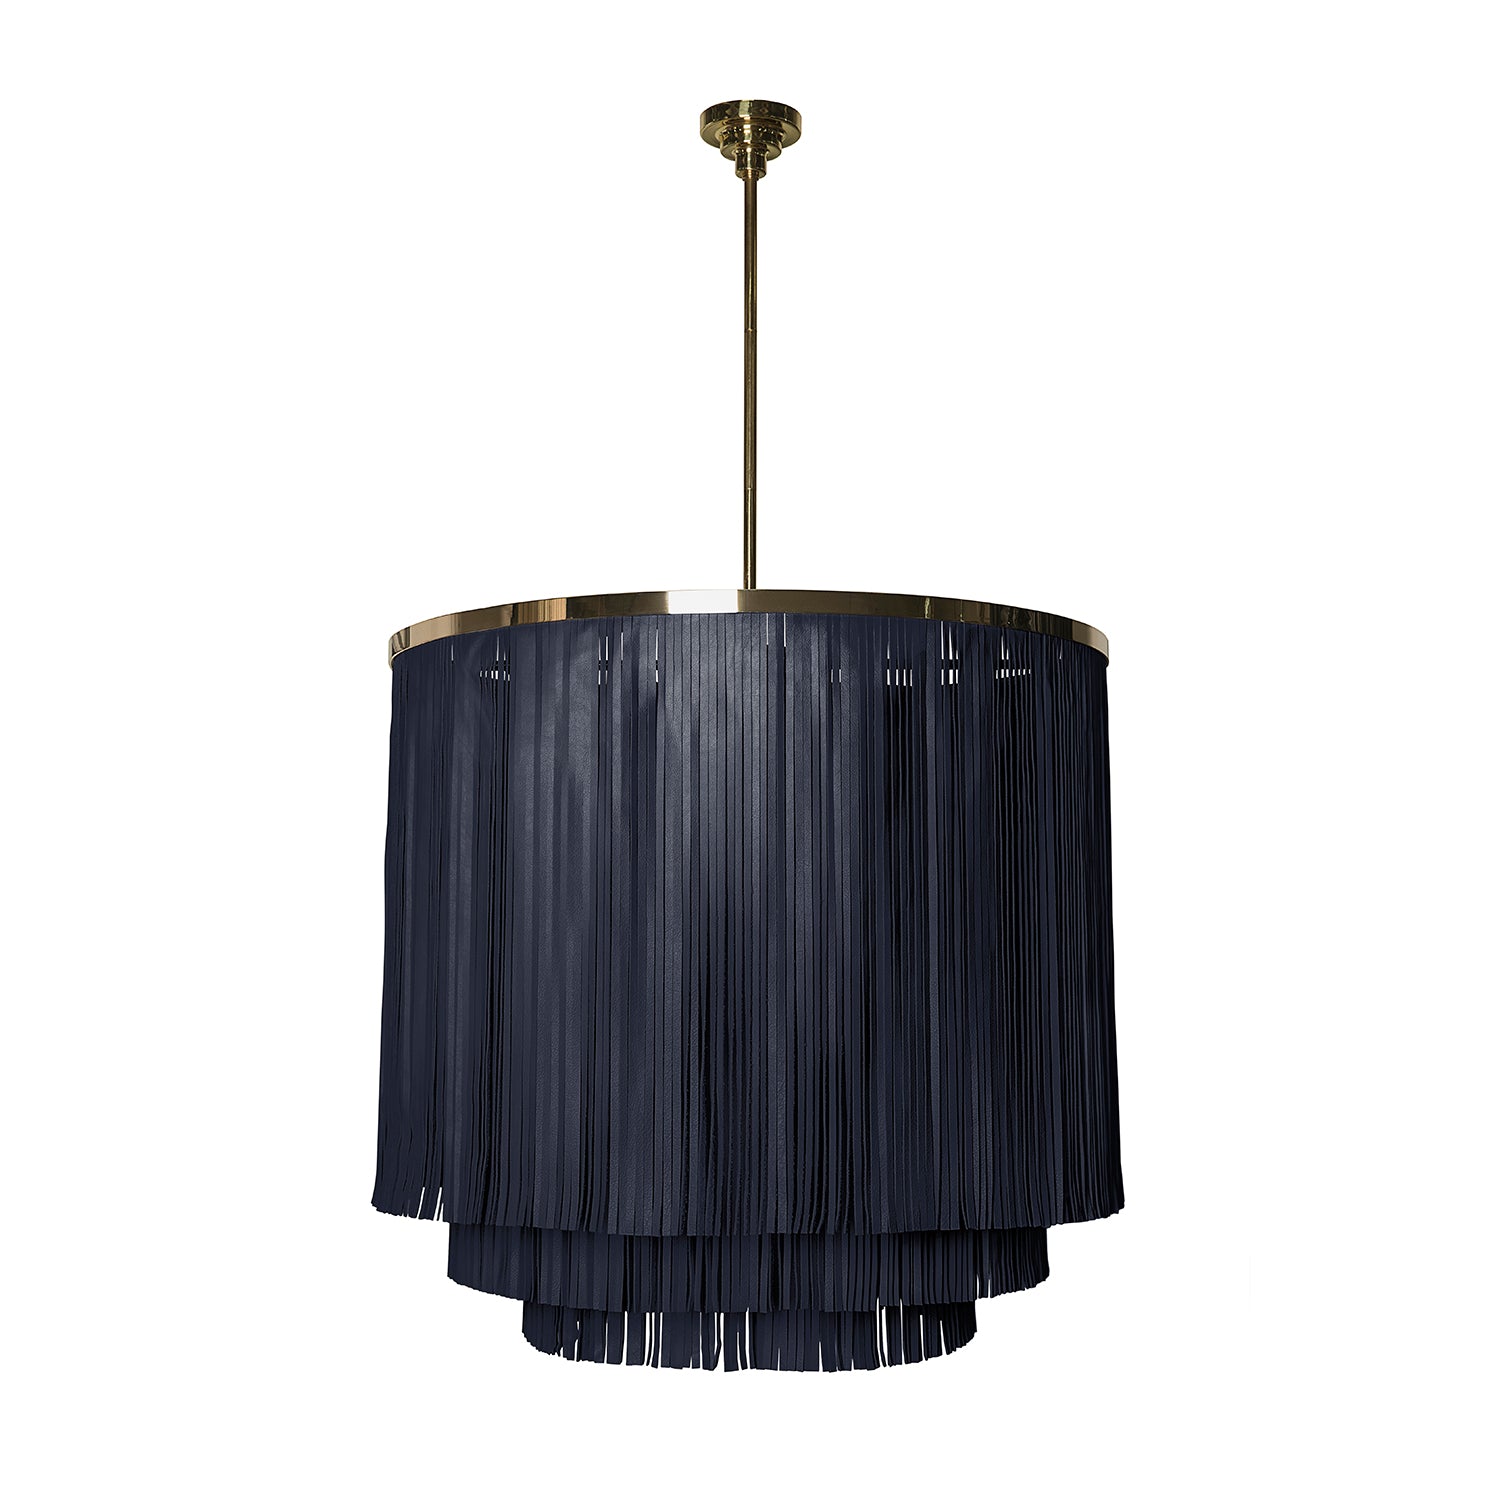 Large NeKeia Leather Chandelier in Brass Finish and NeKeia Leather